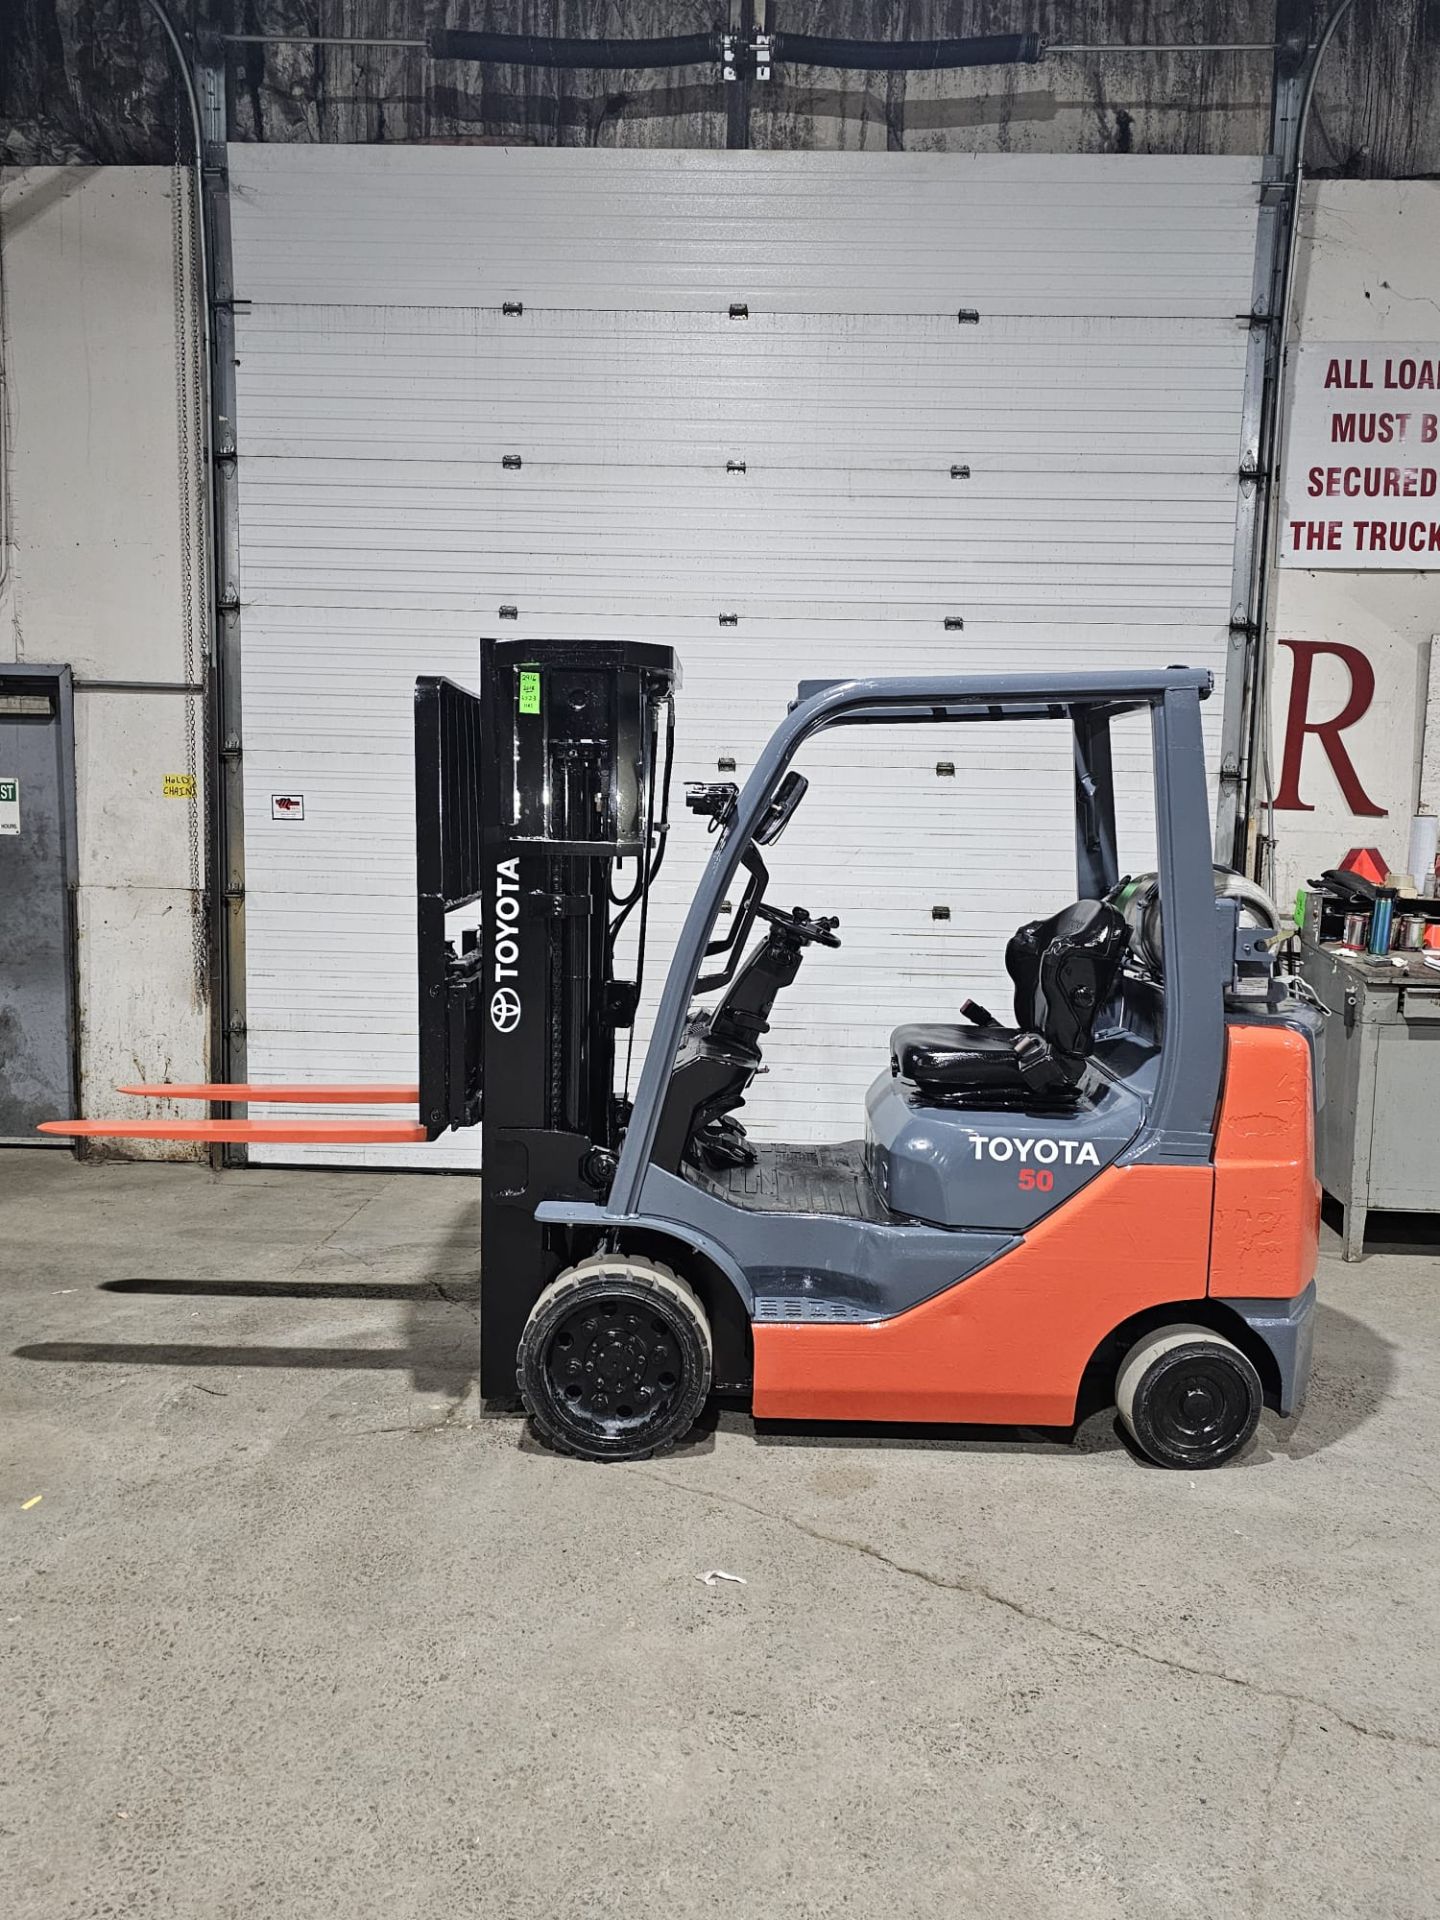 2018 TOYOTA 5,000lbs Capacity LPG (Propane) Forklift 4-STAGE with sideshift (no propane tank